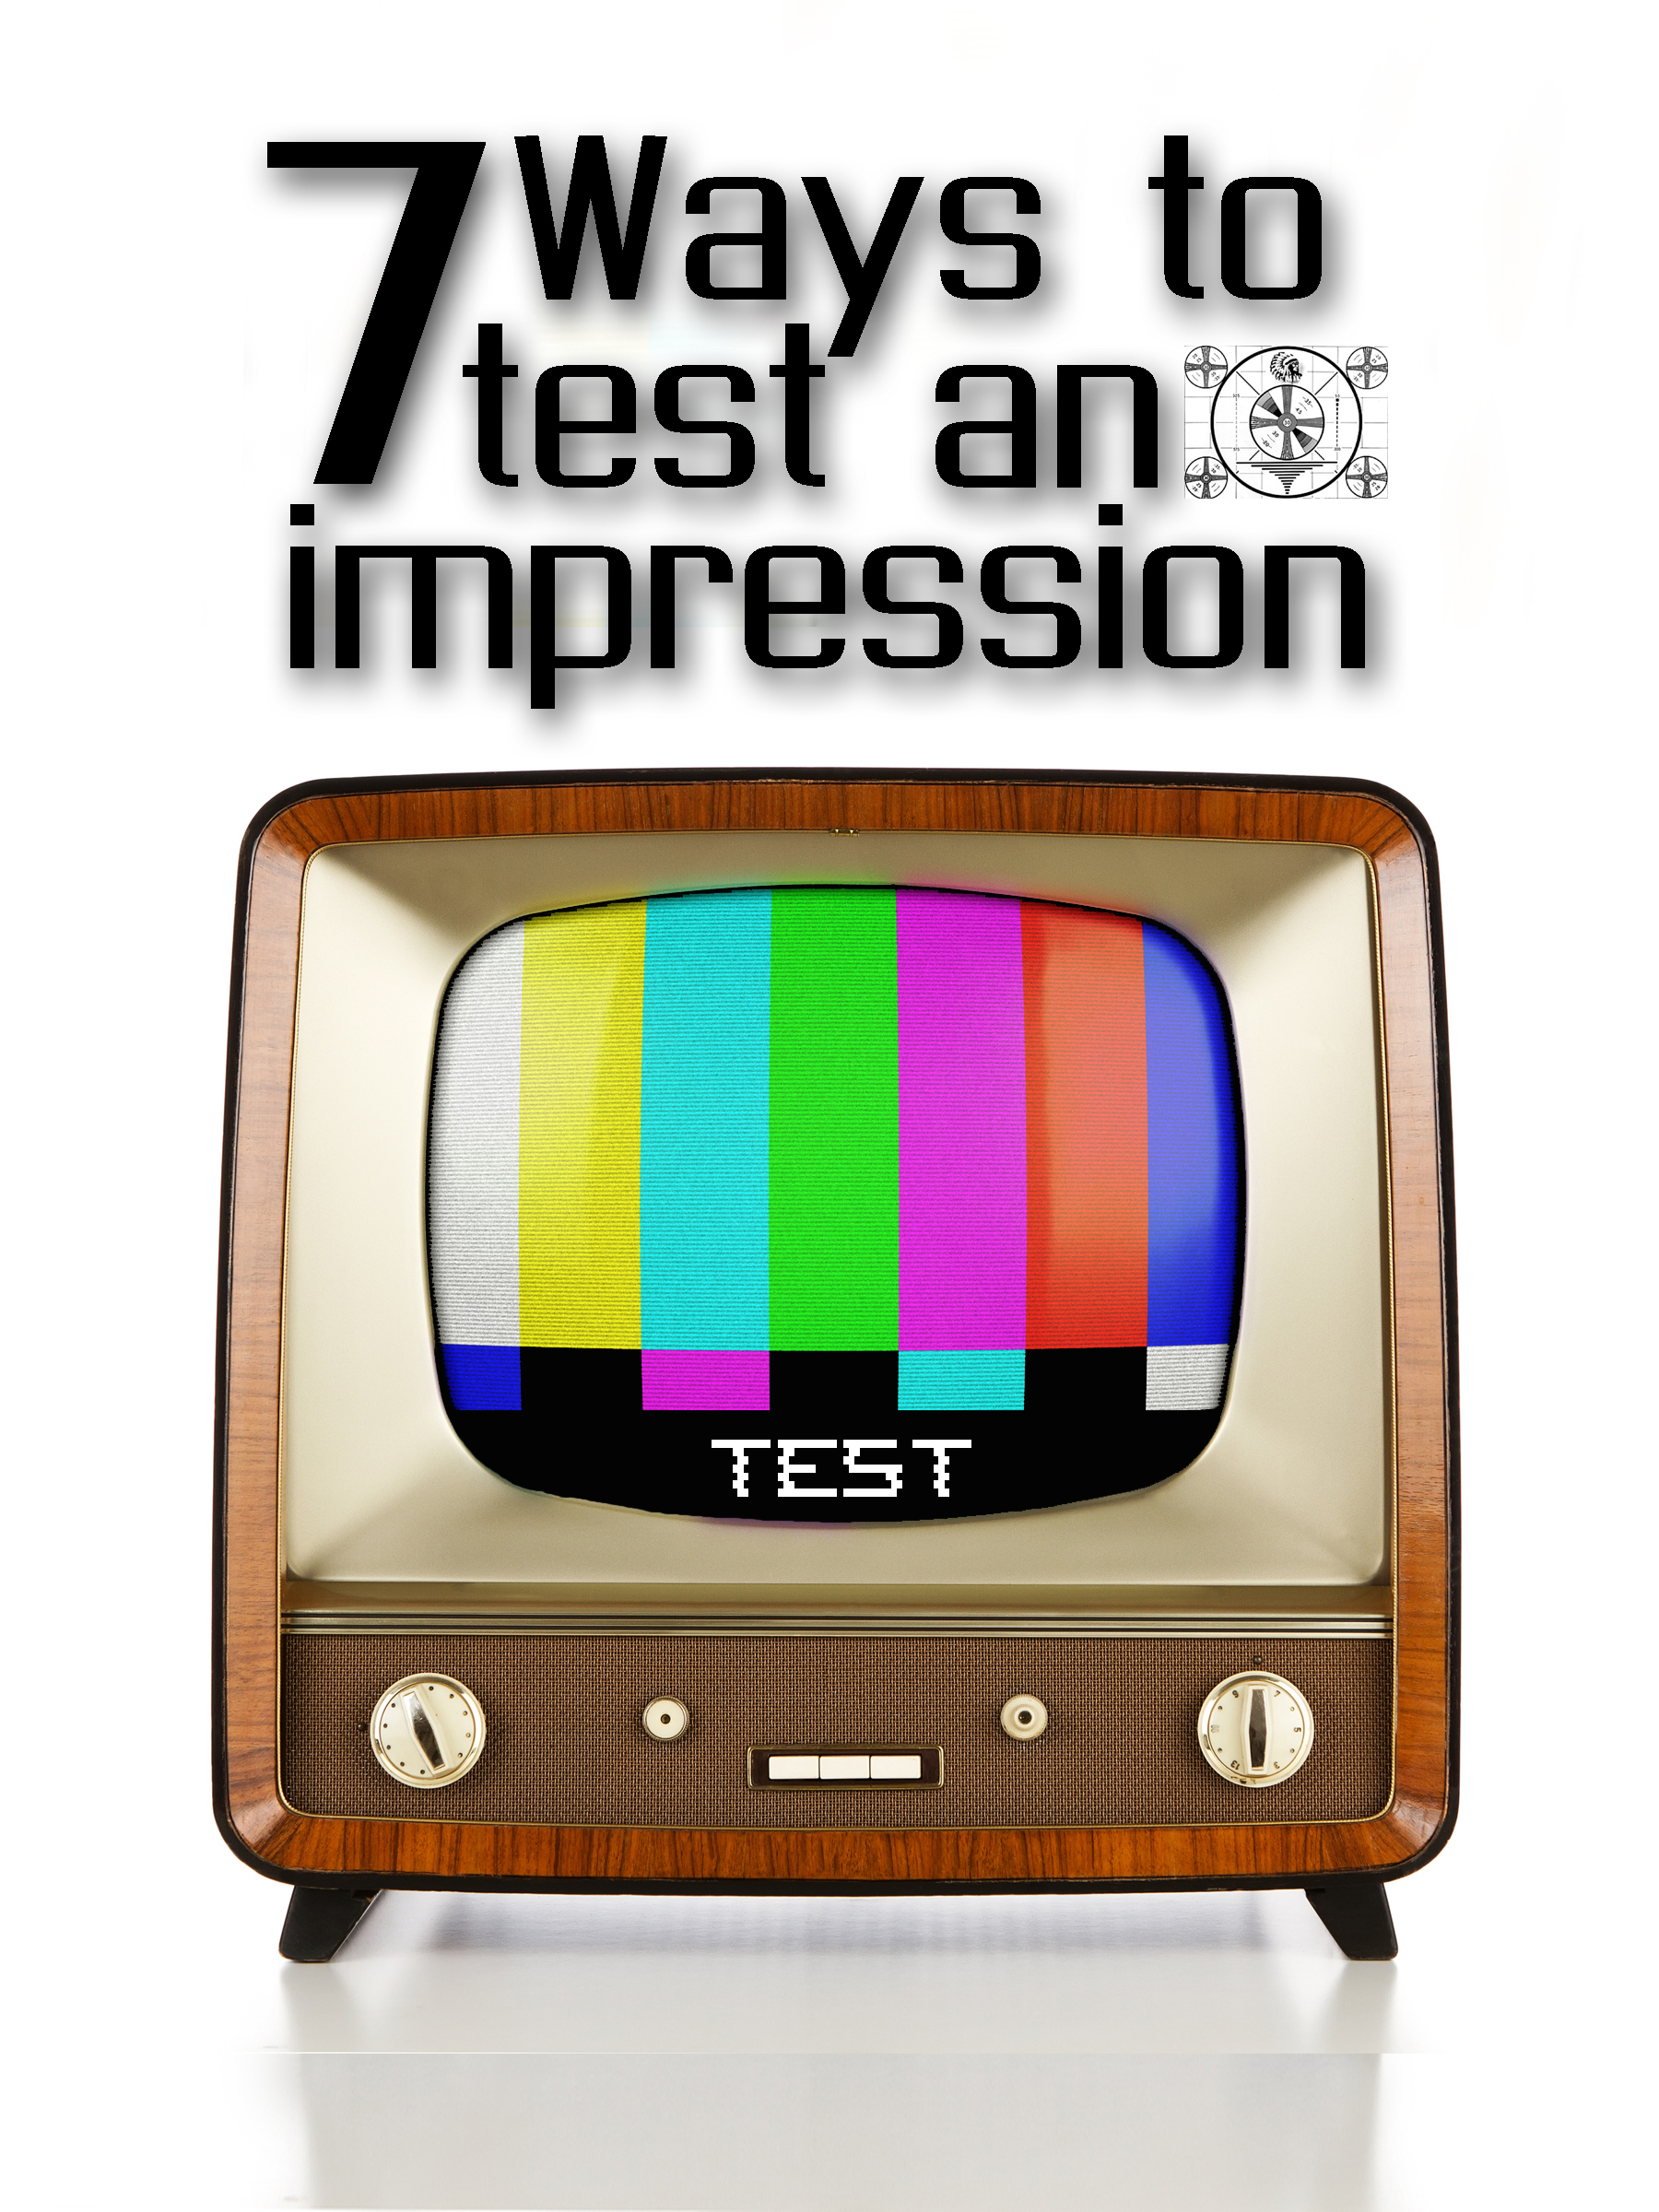 12-01-13  7 Ways To Test An Impression - Part 2 - Recognizing God's Voice